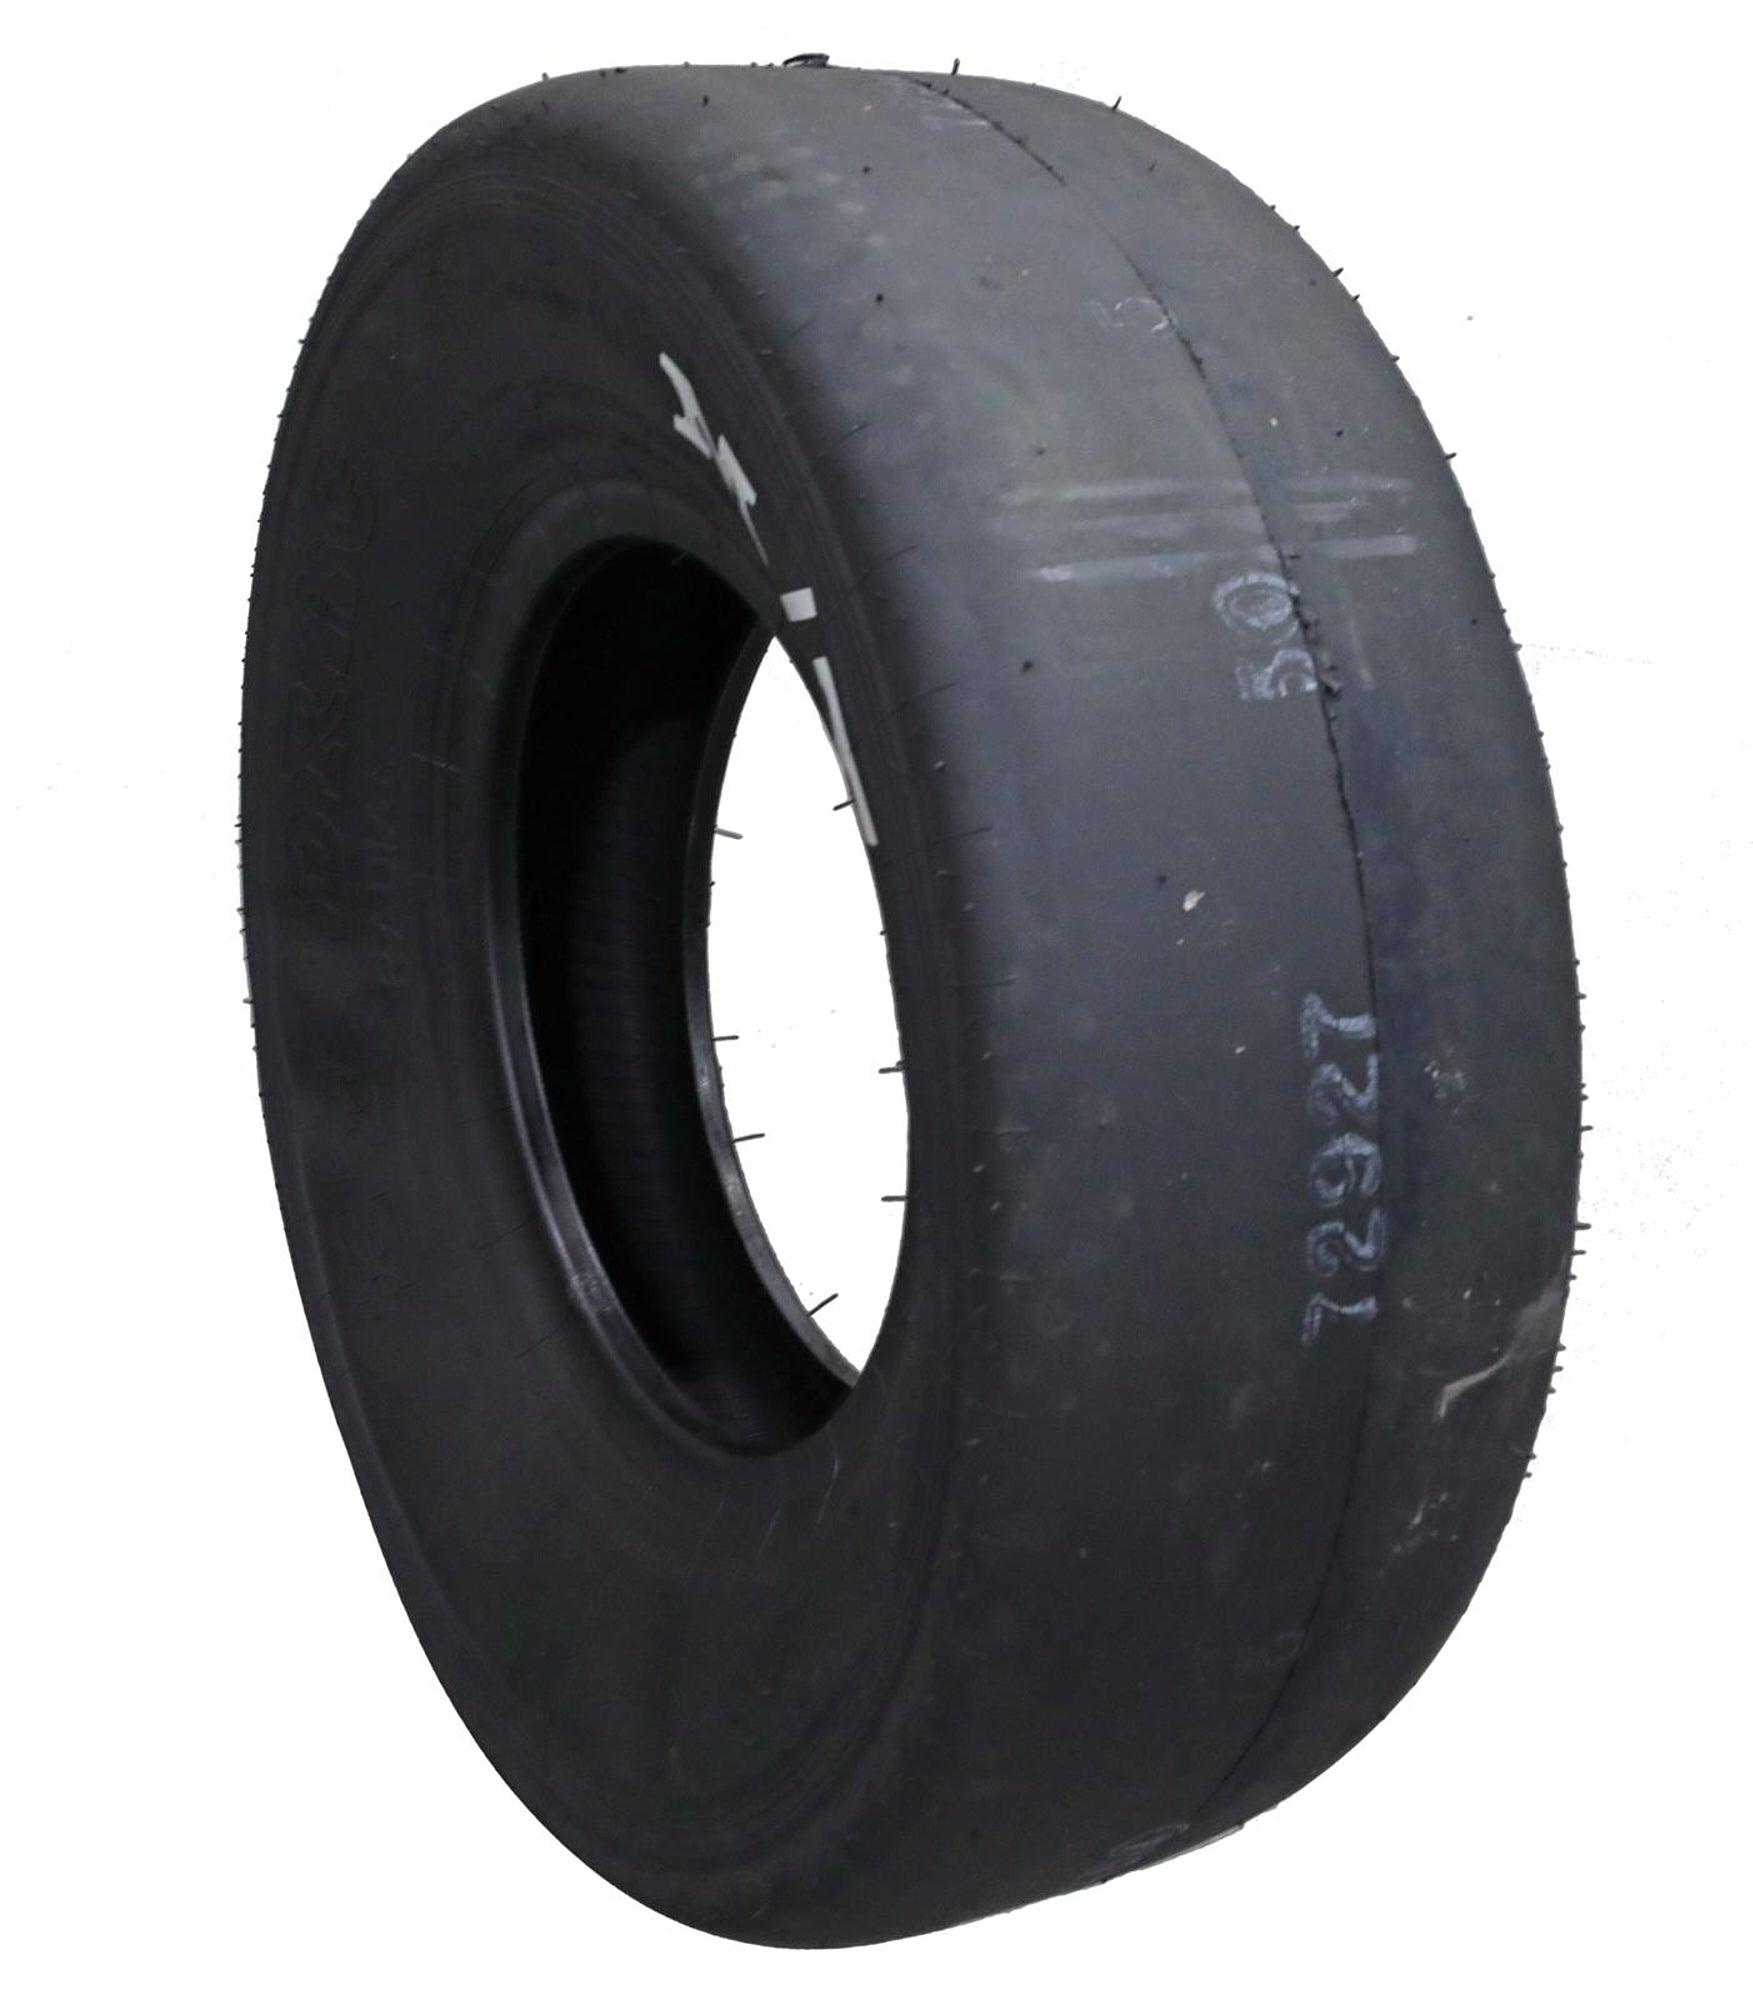 30.0/9.0R15 R1 Pro Drag Radial Tire - Burlile Performance Products